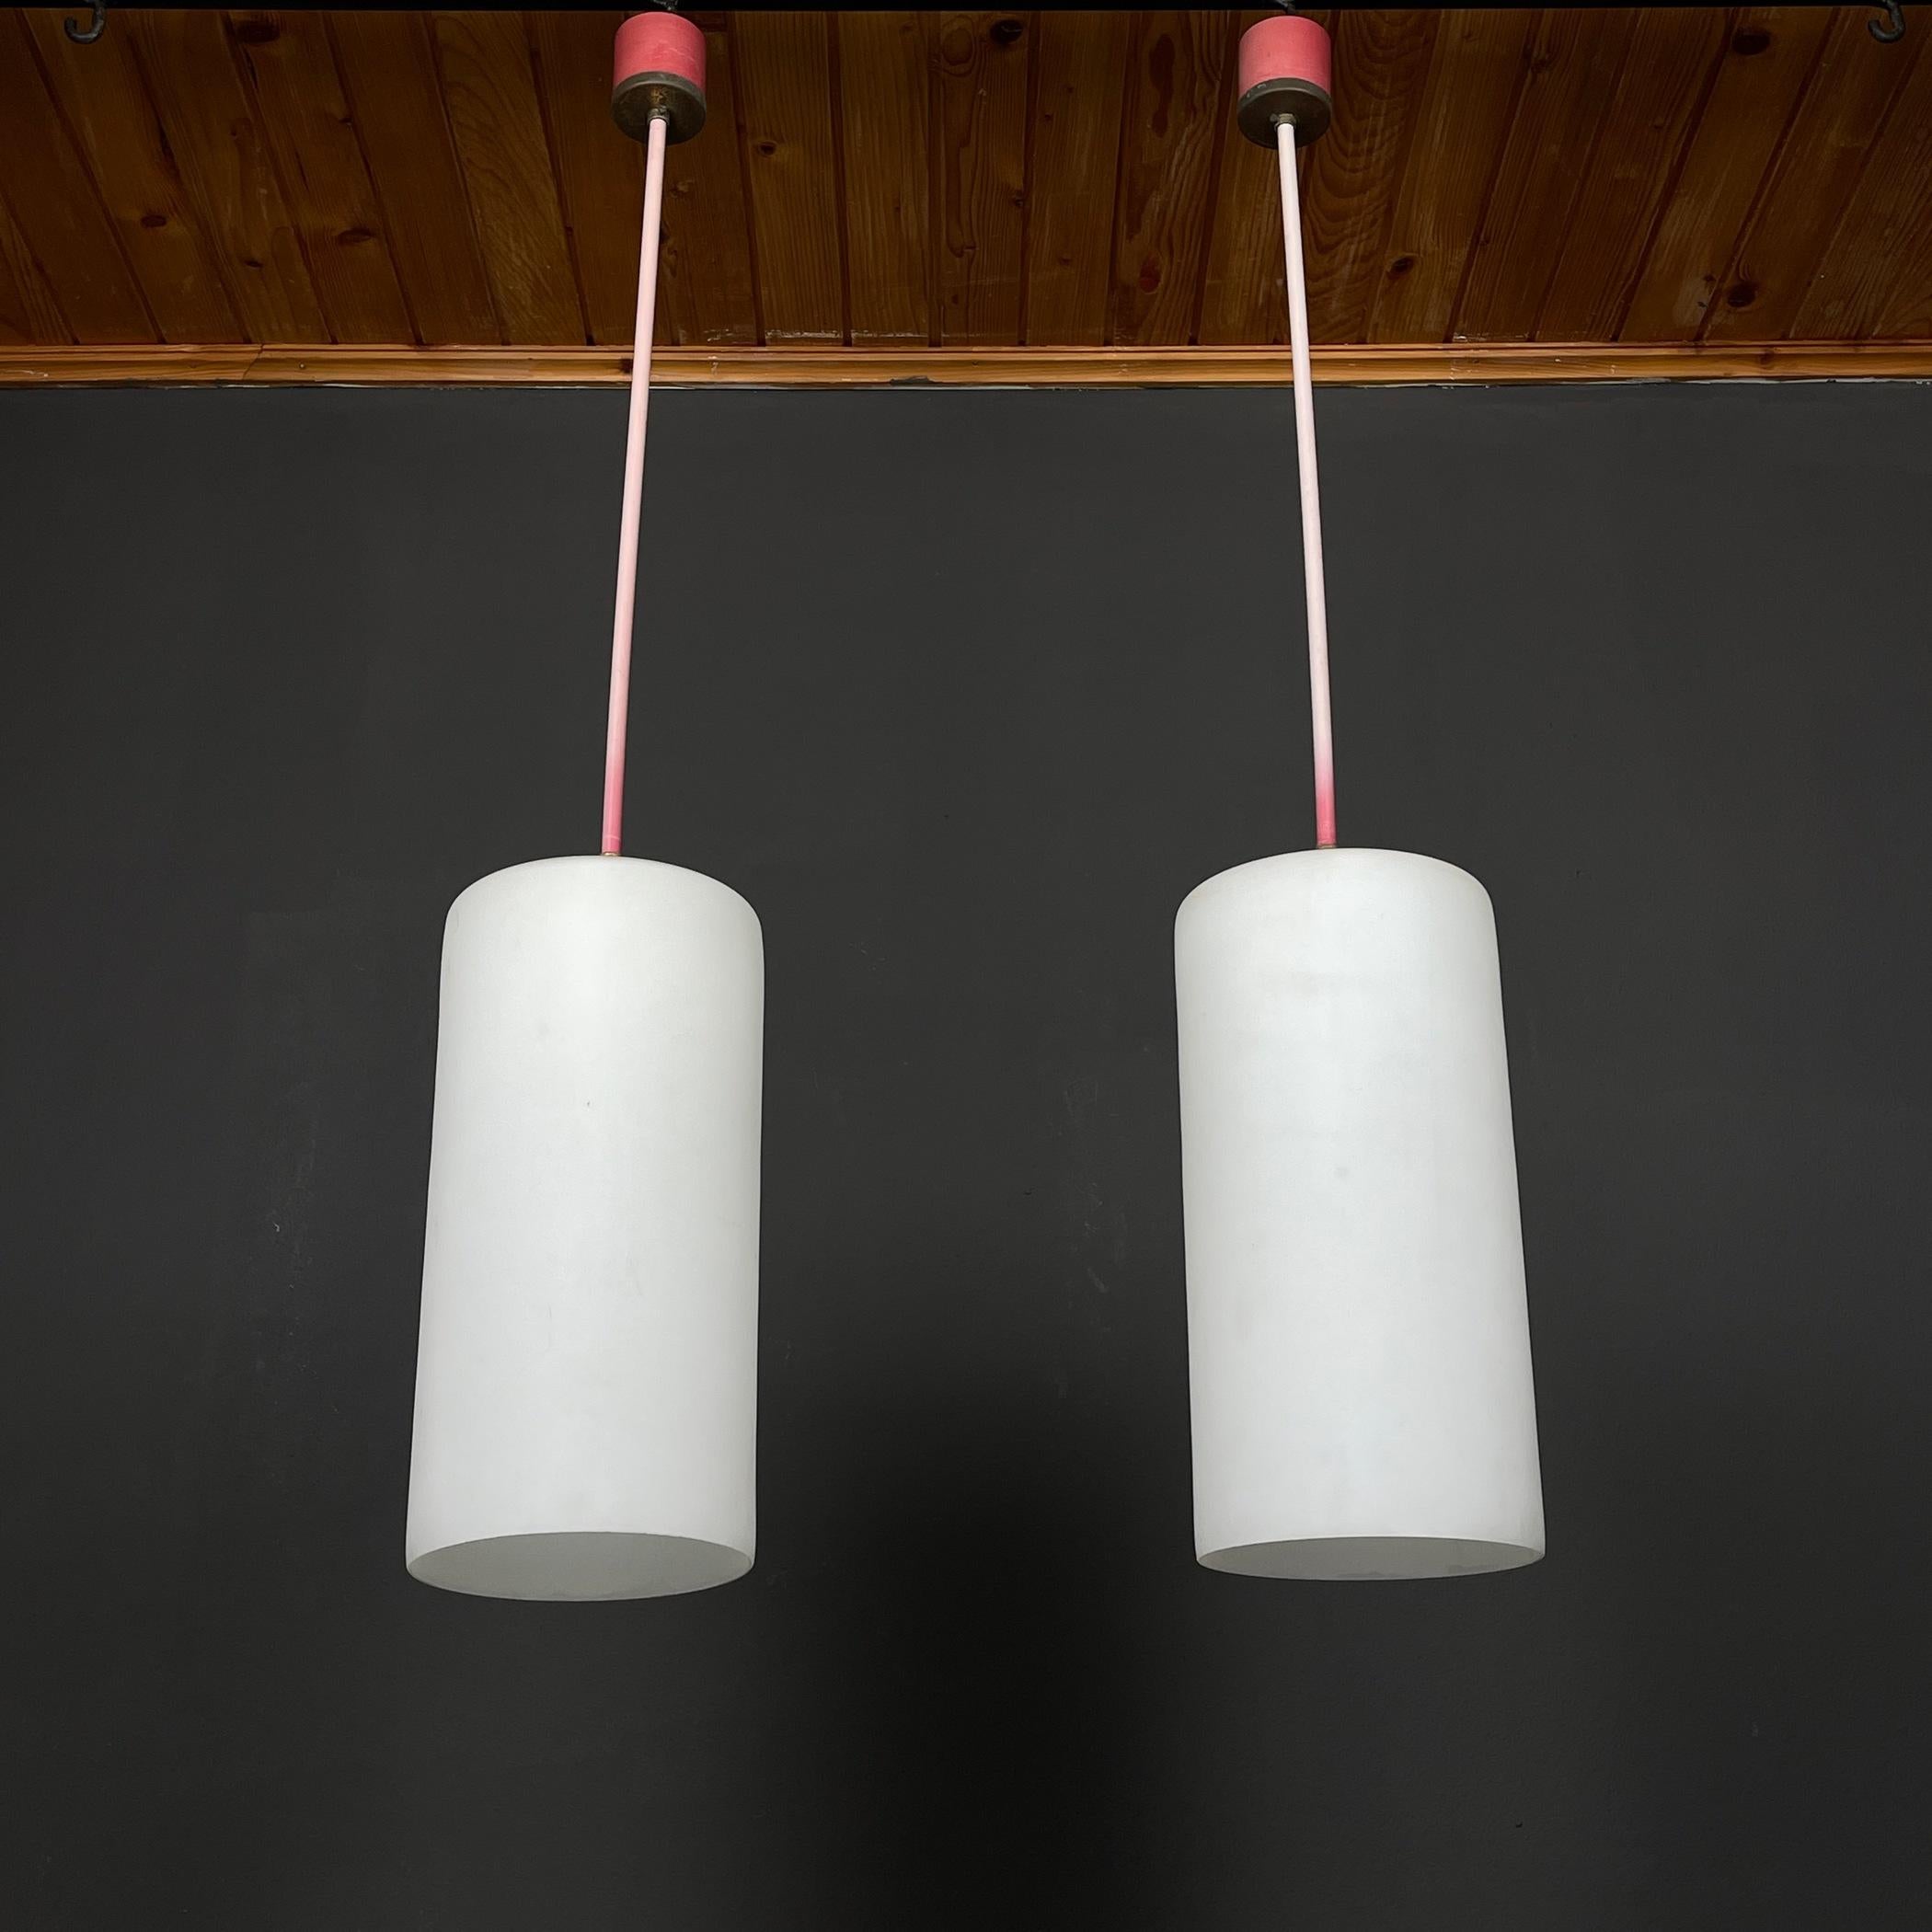 Step back in time with this remarkable set of two opaline glass pendant lamps, a testament to the mid-century era's design brilliance. Crafted in Italy during the 1960s, these lamps emanate industrial Italian lighting charm. The opaline glass shades